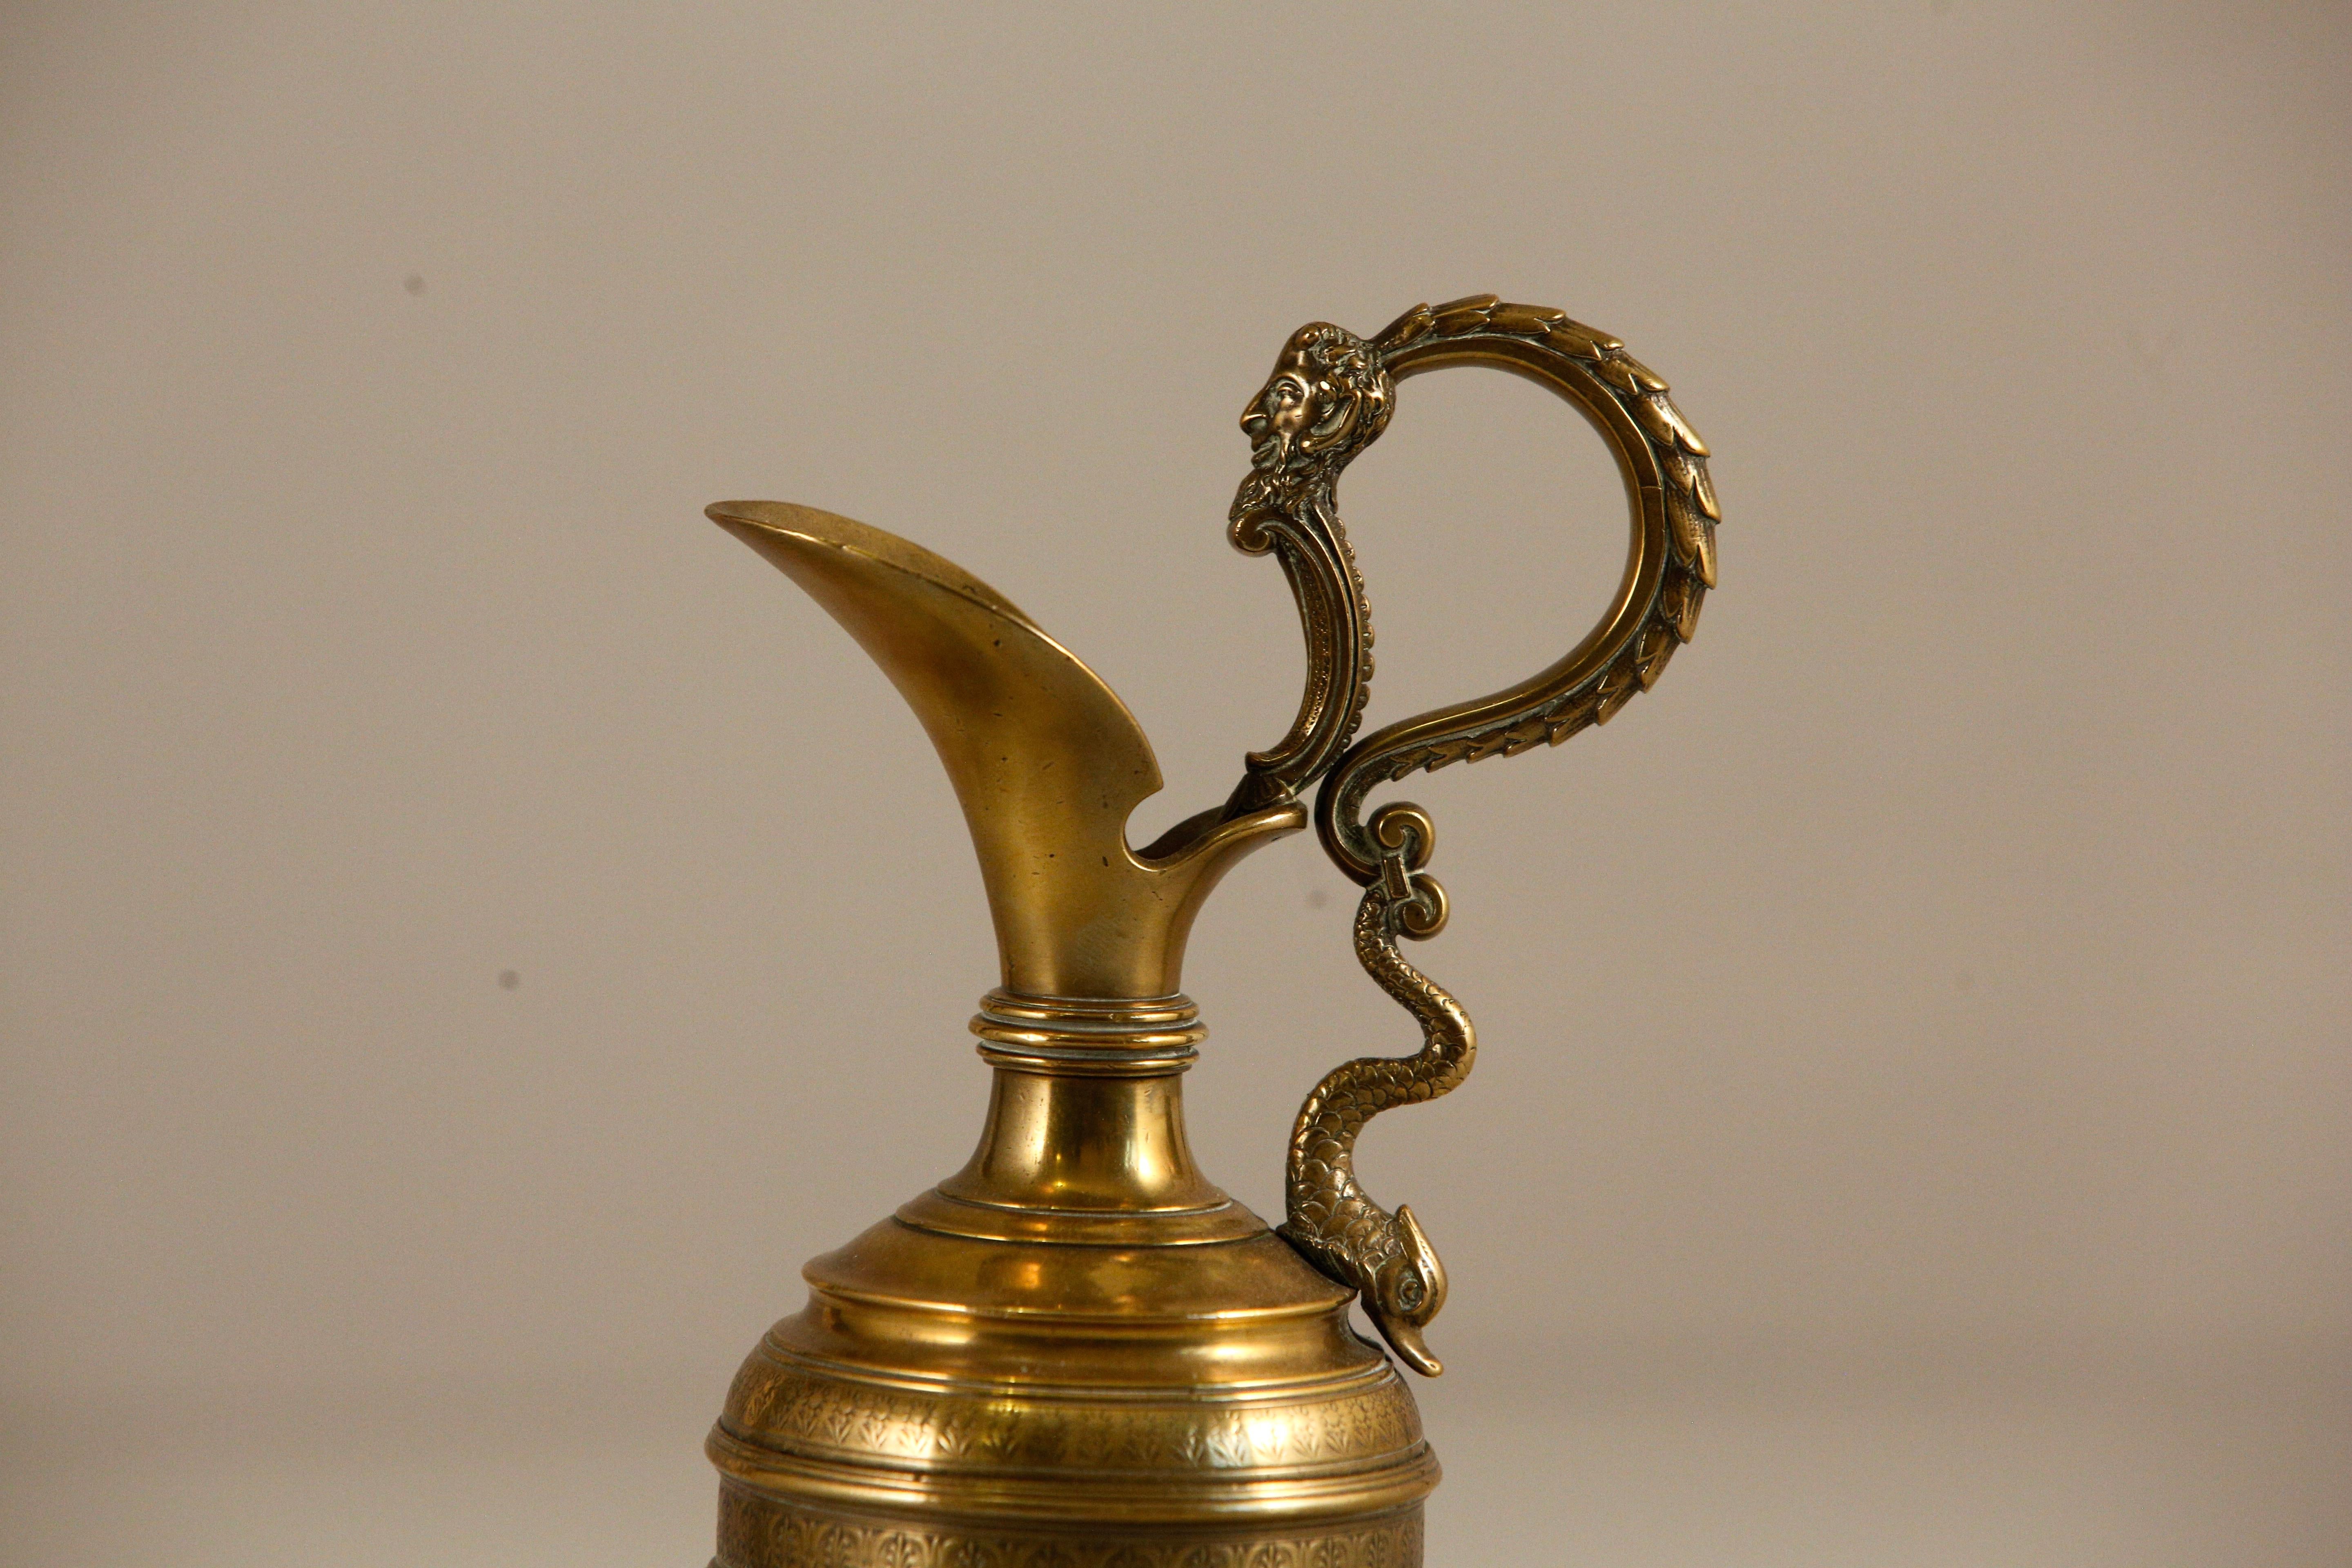 Small bronze ewer with Bacchus and dolphin figural handle, engraved solid oval centerpiece mounted on a circular base. 